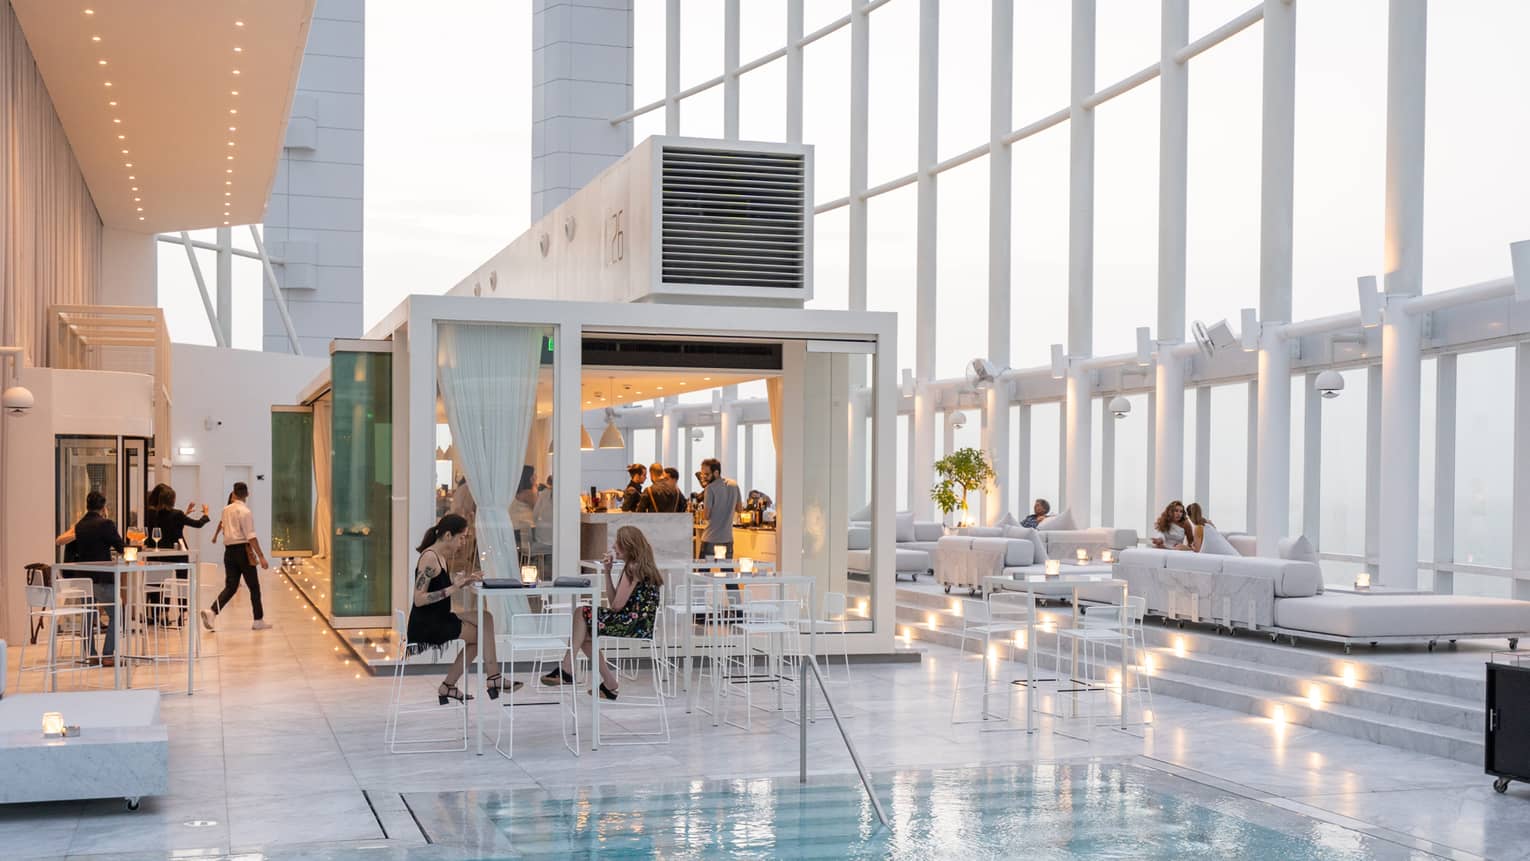 People mingle around a contemporary white bar next to pool